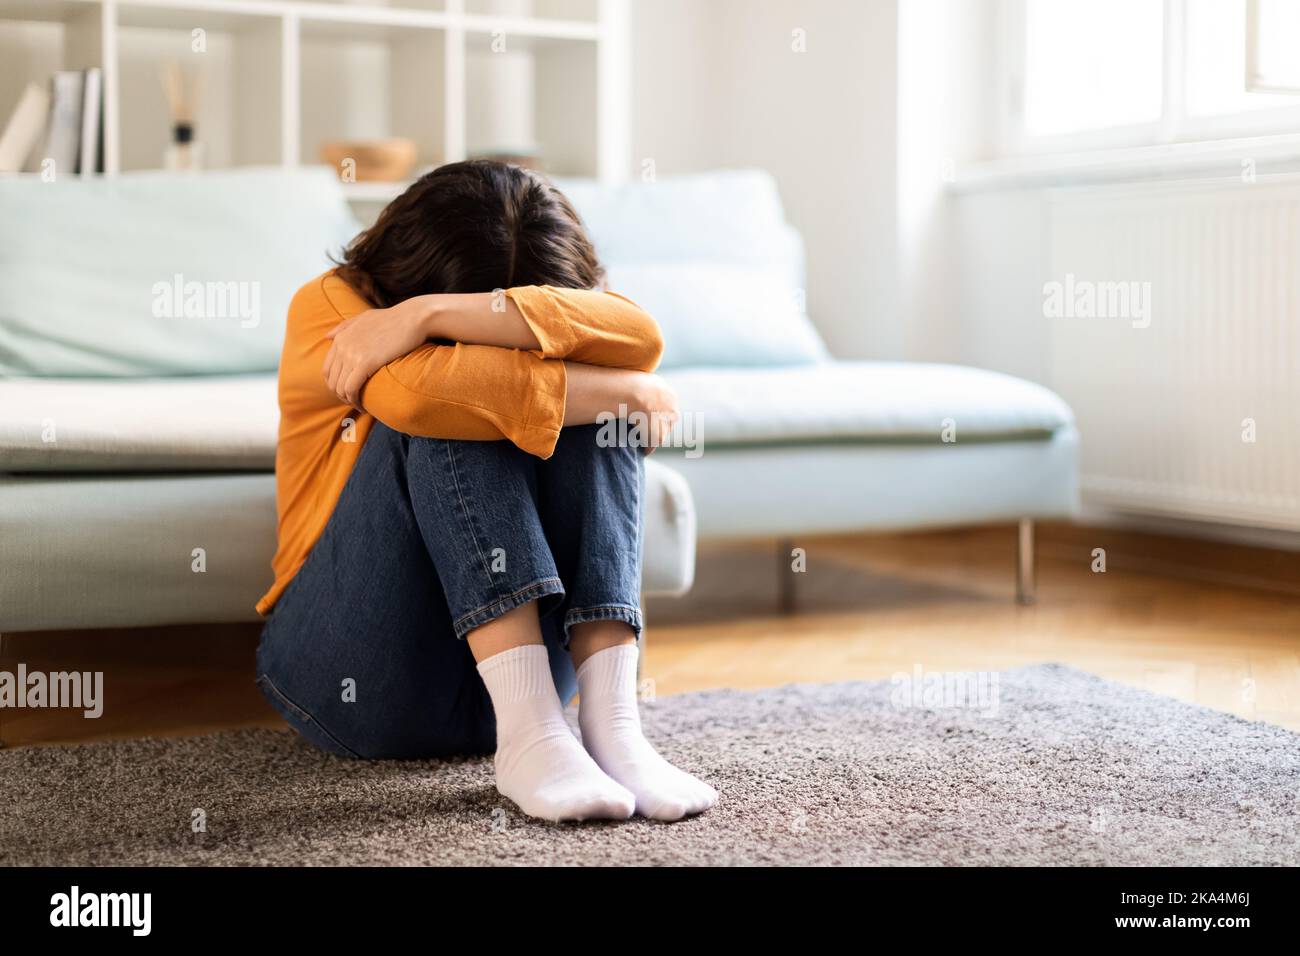 Depression Concept. Portrait Of Upset Young Middle Eastern Woman Crying At Home Stock Photo